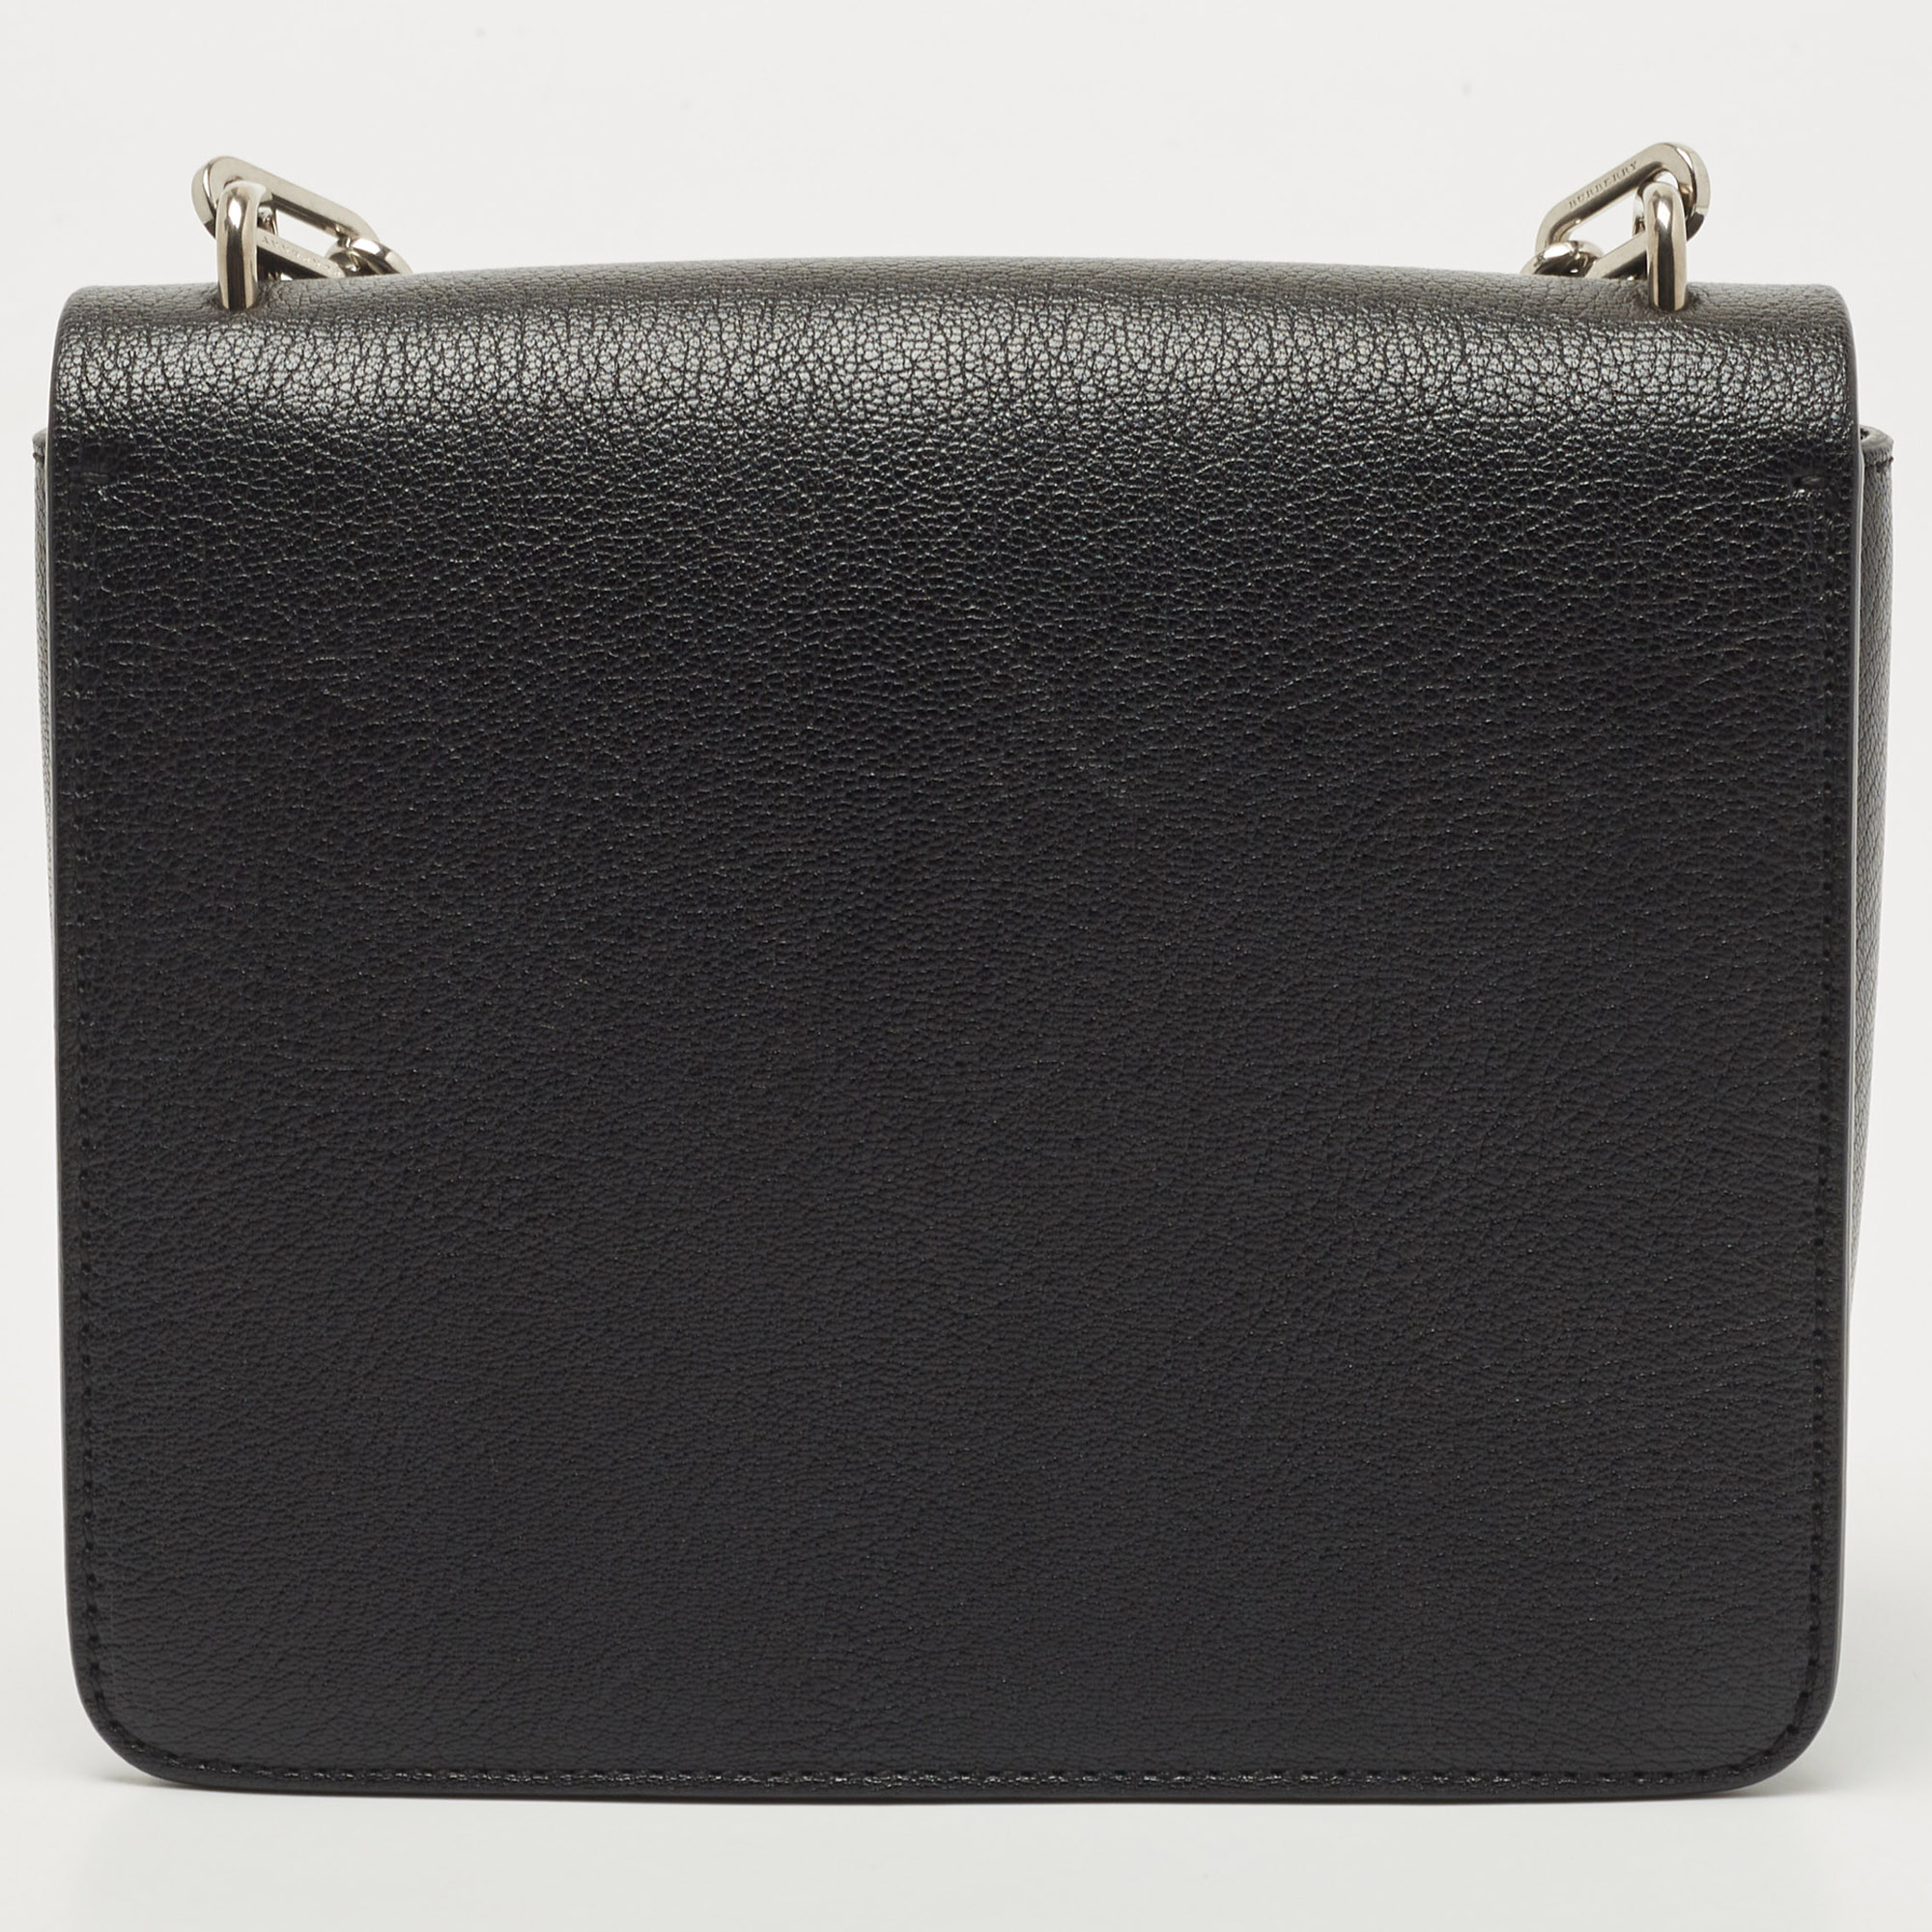 Burberry Black Leather Small D Ring Shoulder Bag